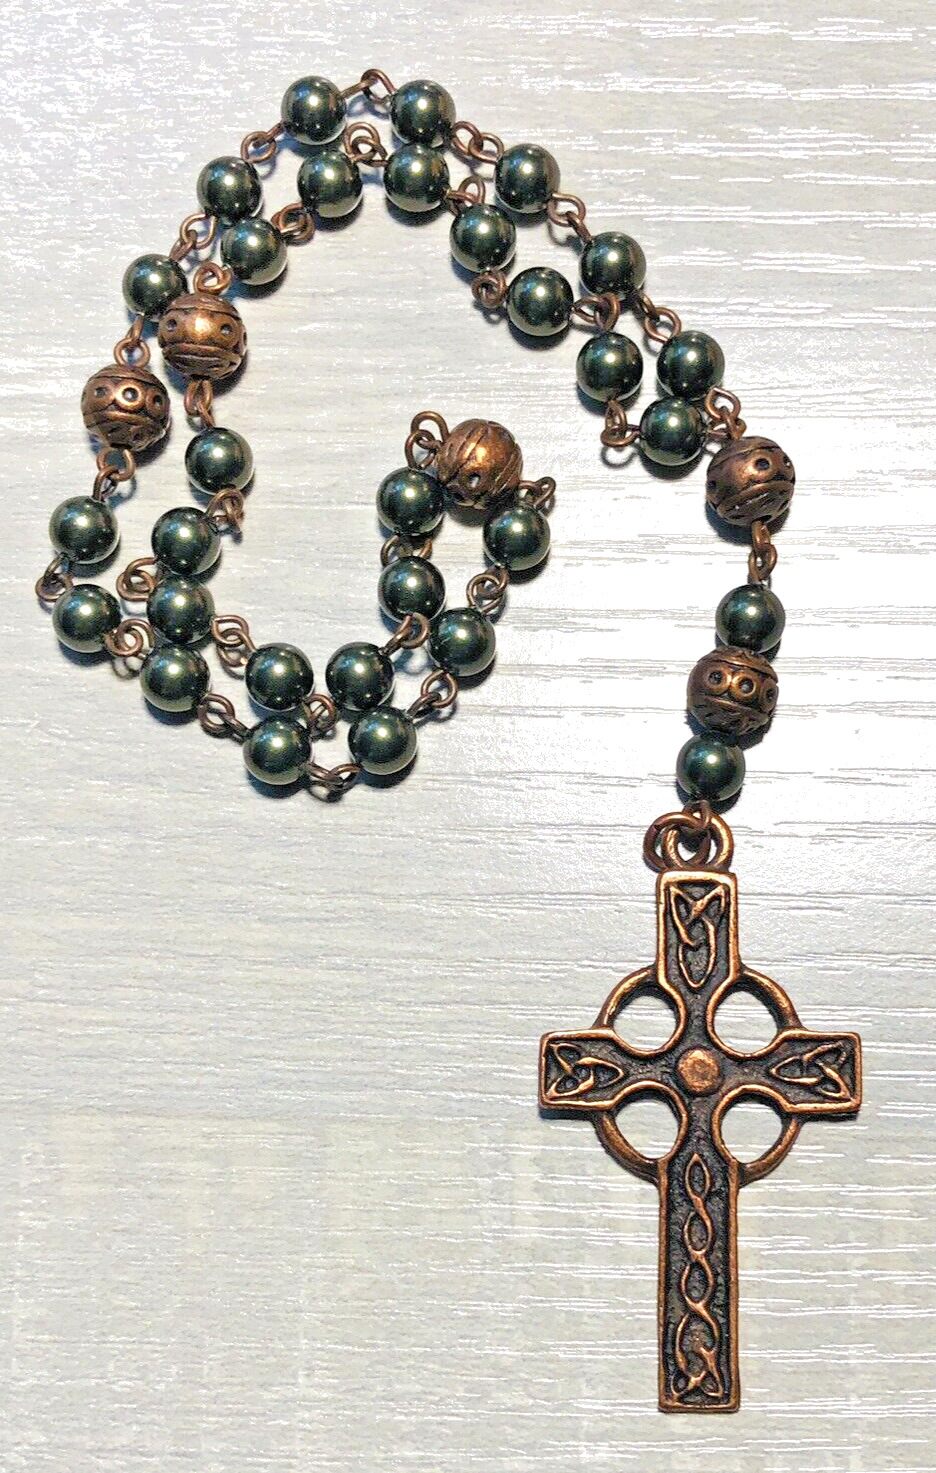 Vintage Anglican Prayer Beads, Green Faux-Pearl Glass, Antiqued Copper, Celtic